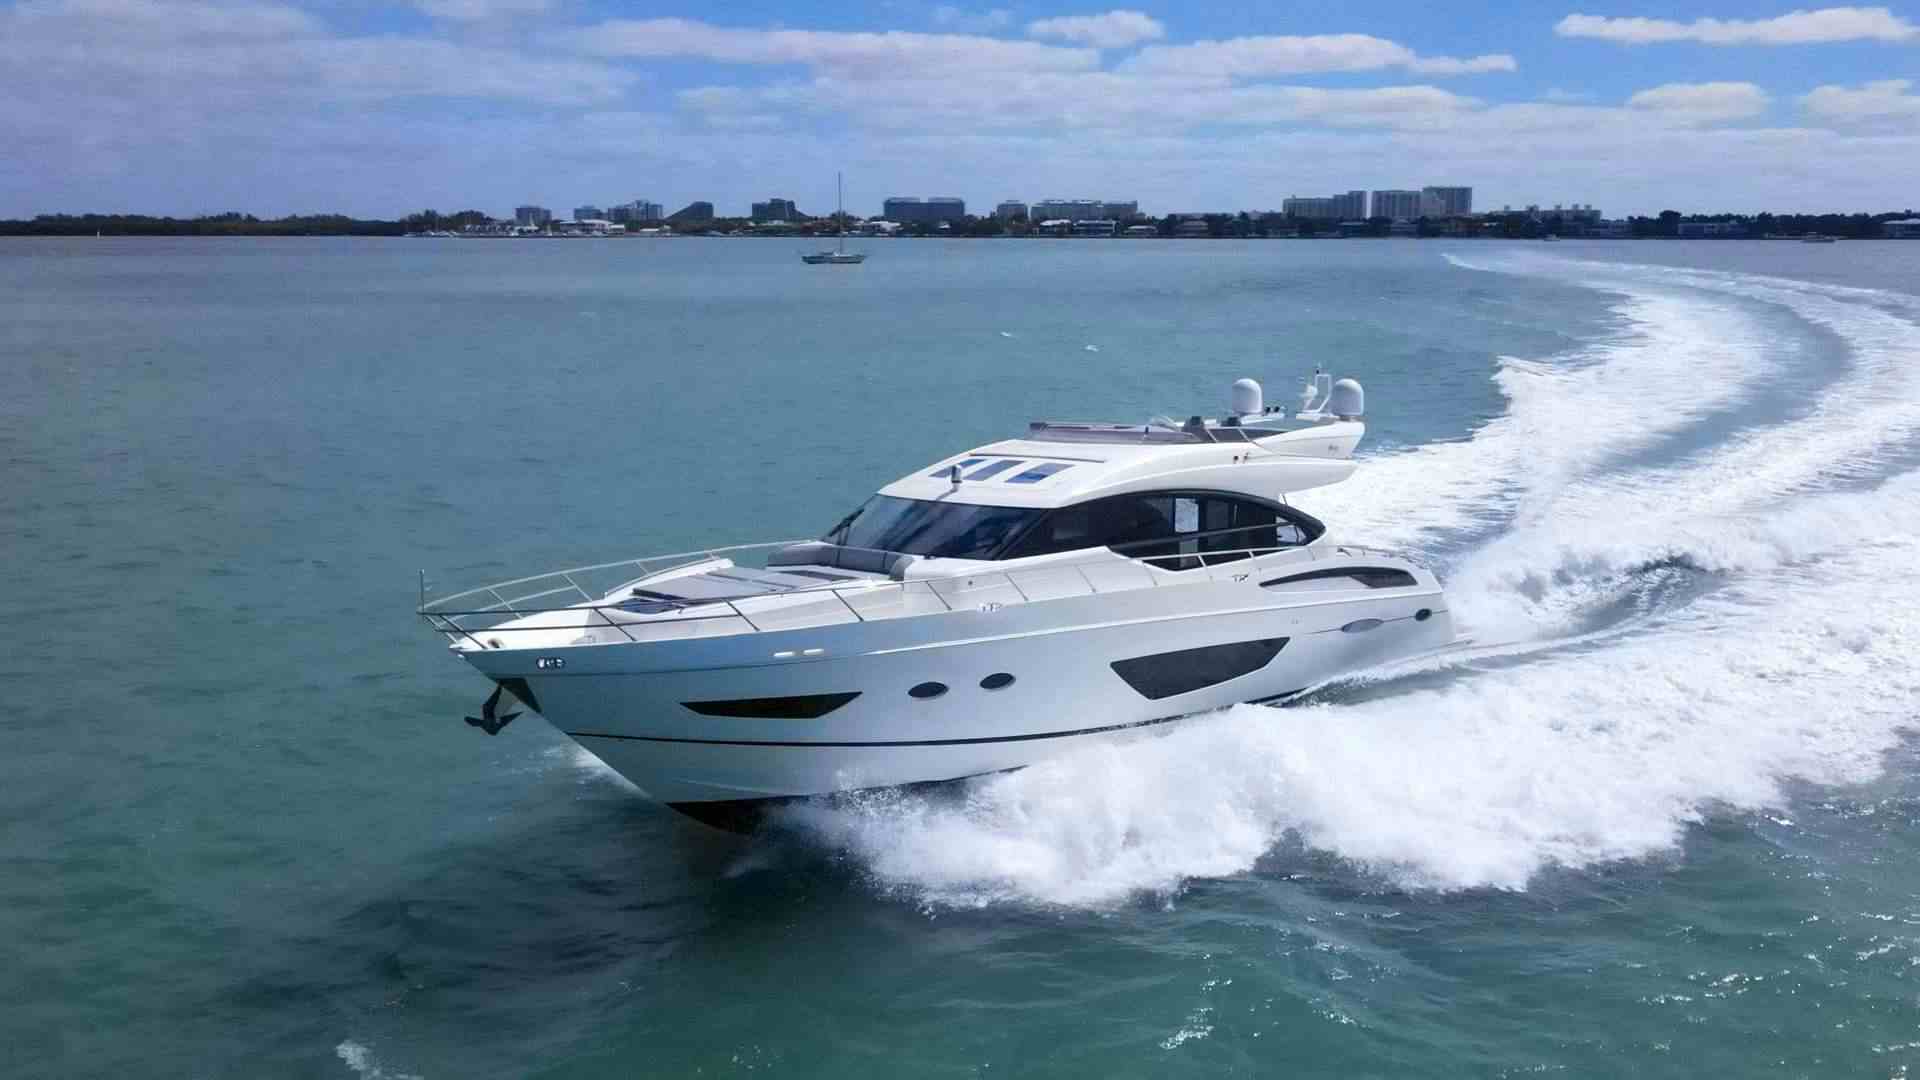 Snowbird - Yacht Charter Key West & Boat hire in Florida 1